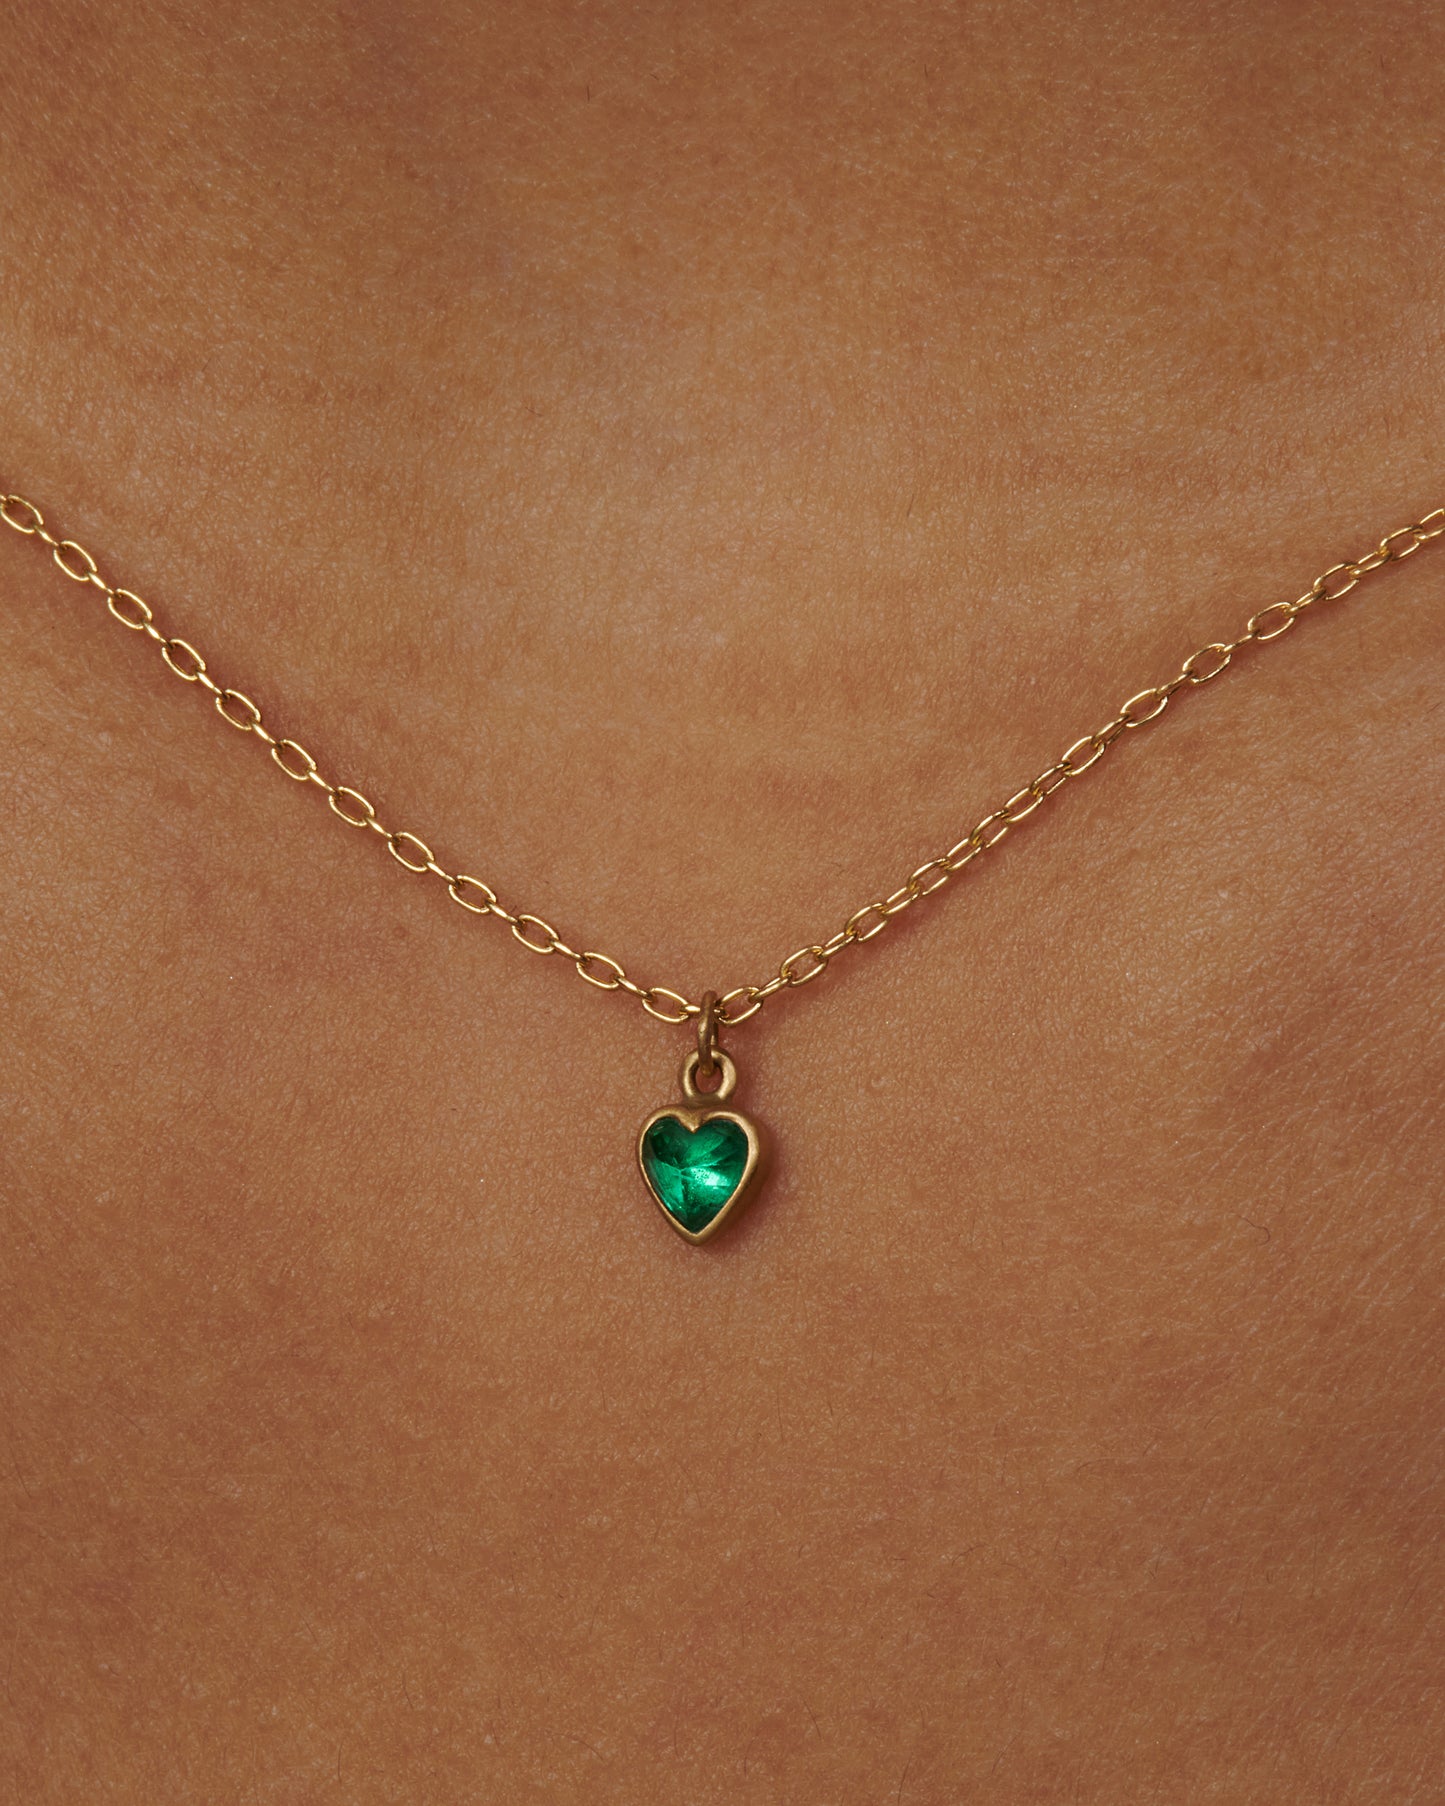 A dainty Colombian emerald heart pendant sweetly swinging on a brushed gold chain.